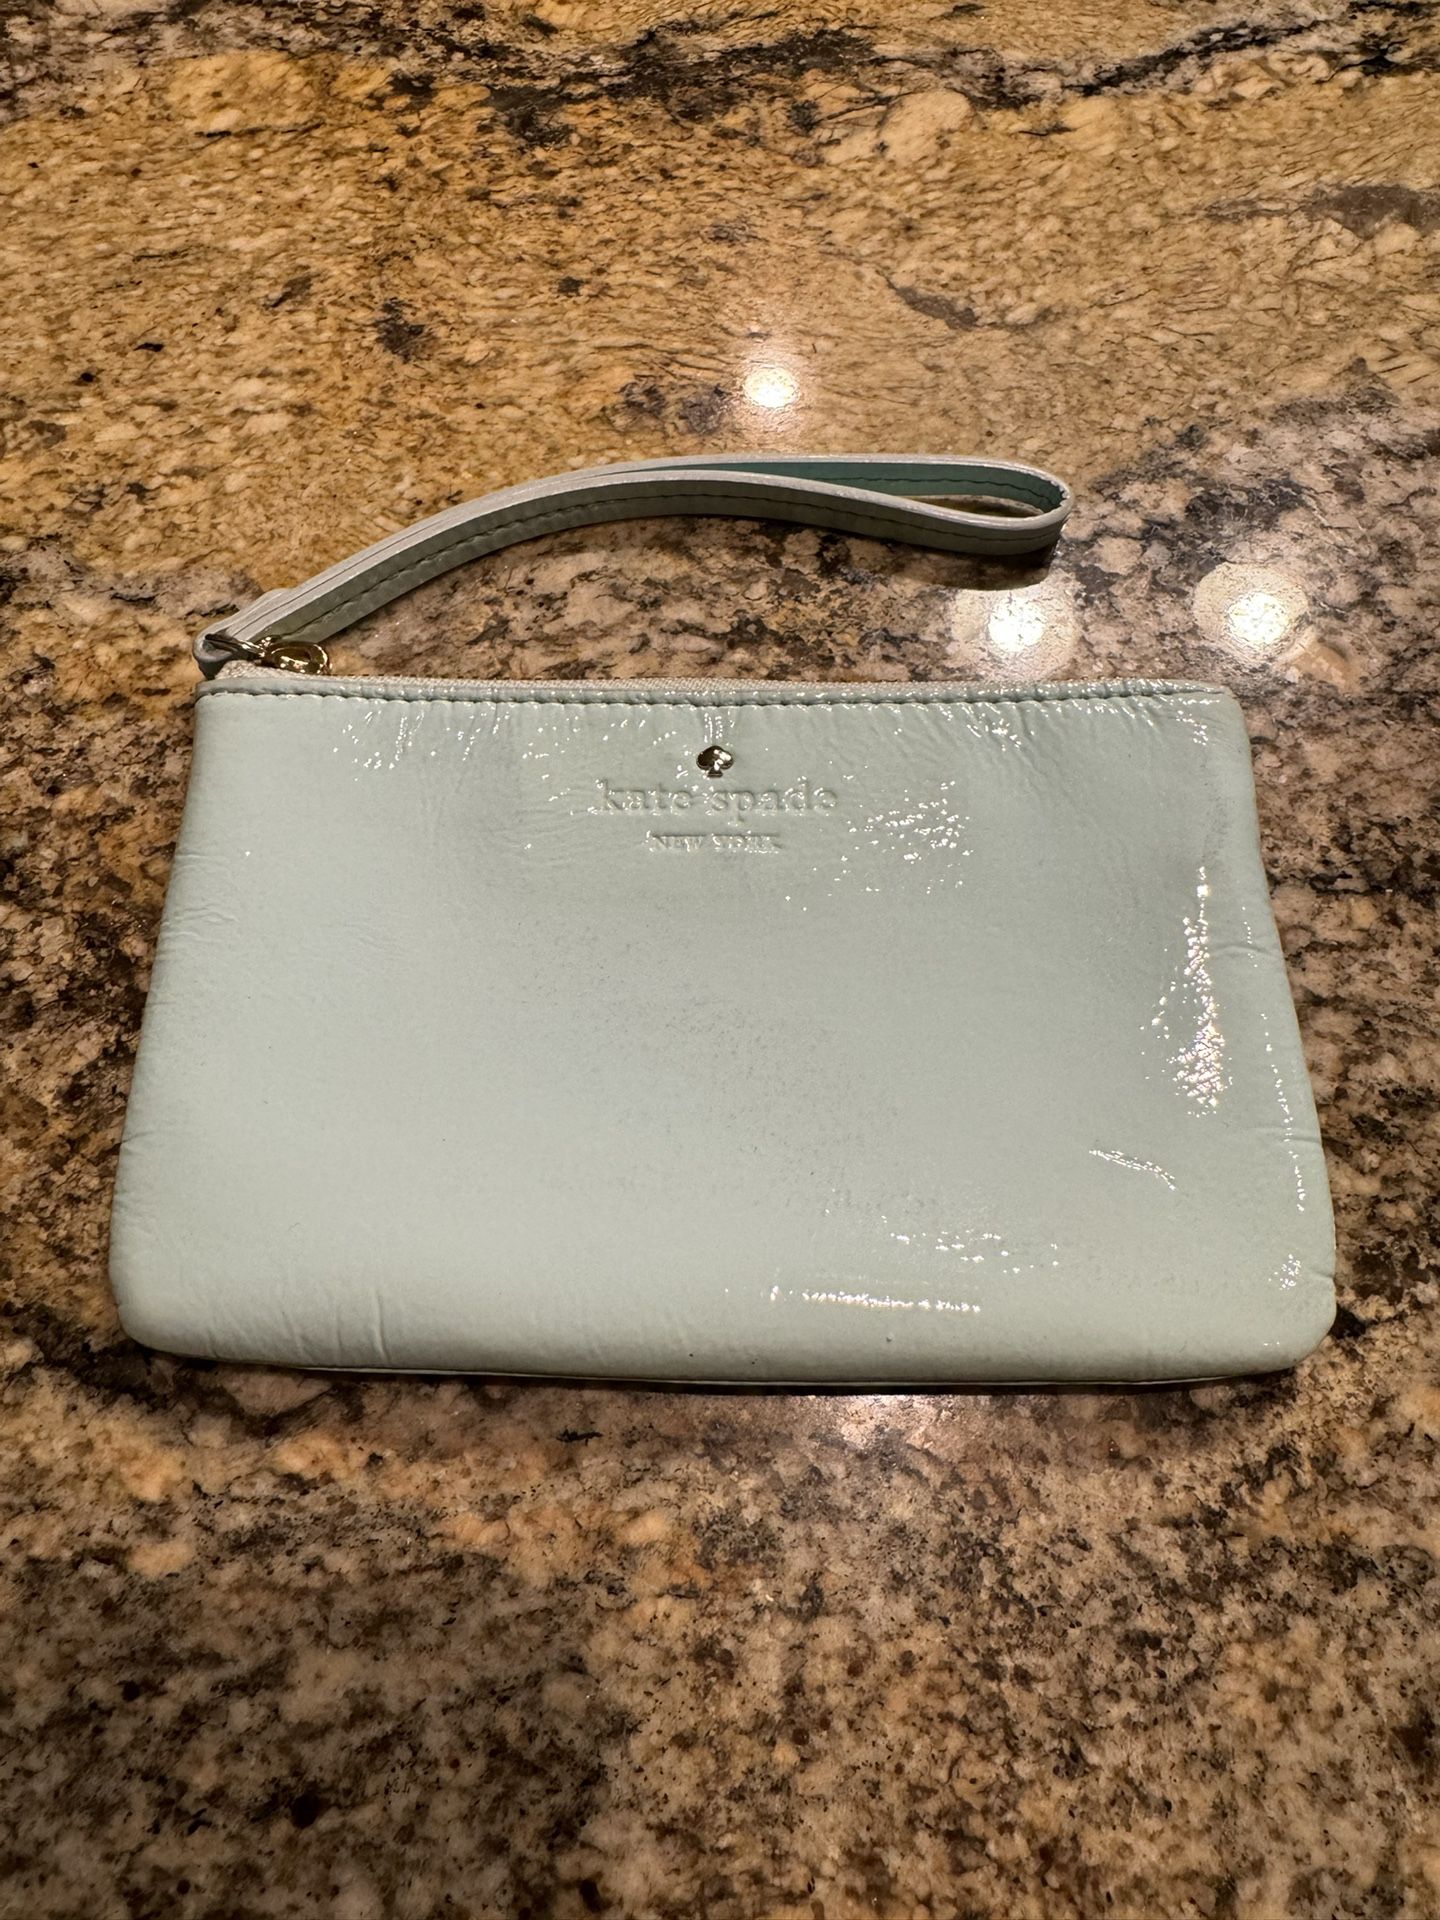 Kate Spade Teal Patent Leather Small Pouch Wristlet Wallet PWRU2820